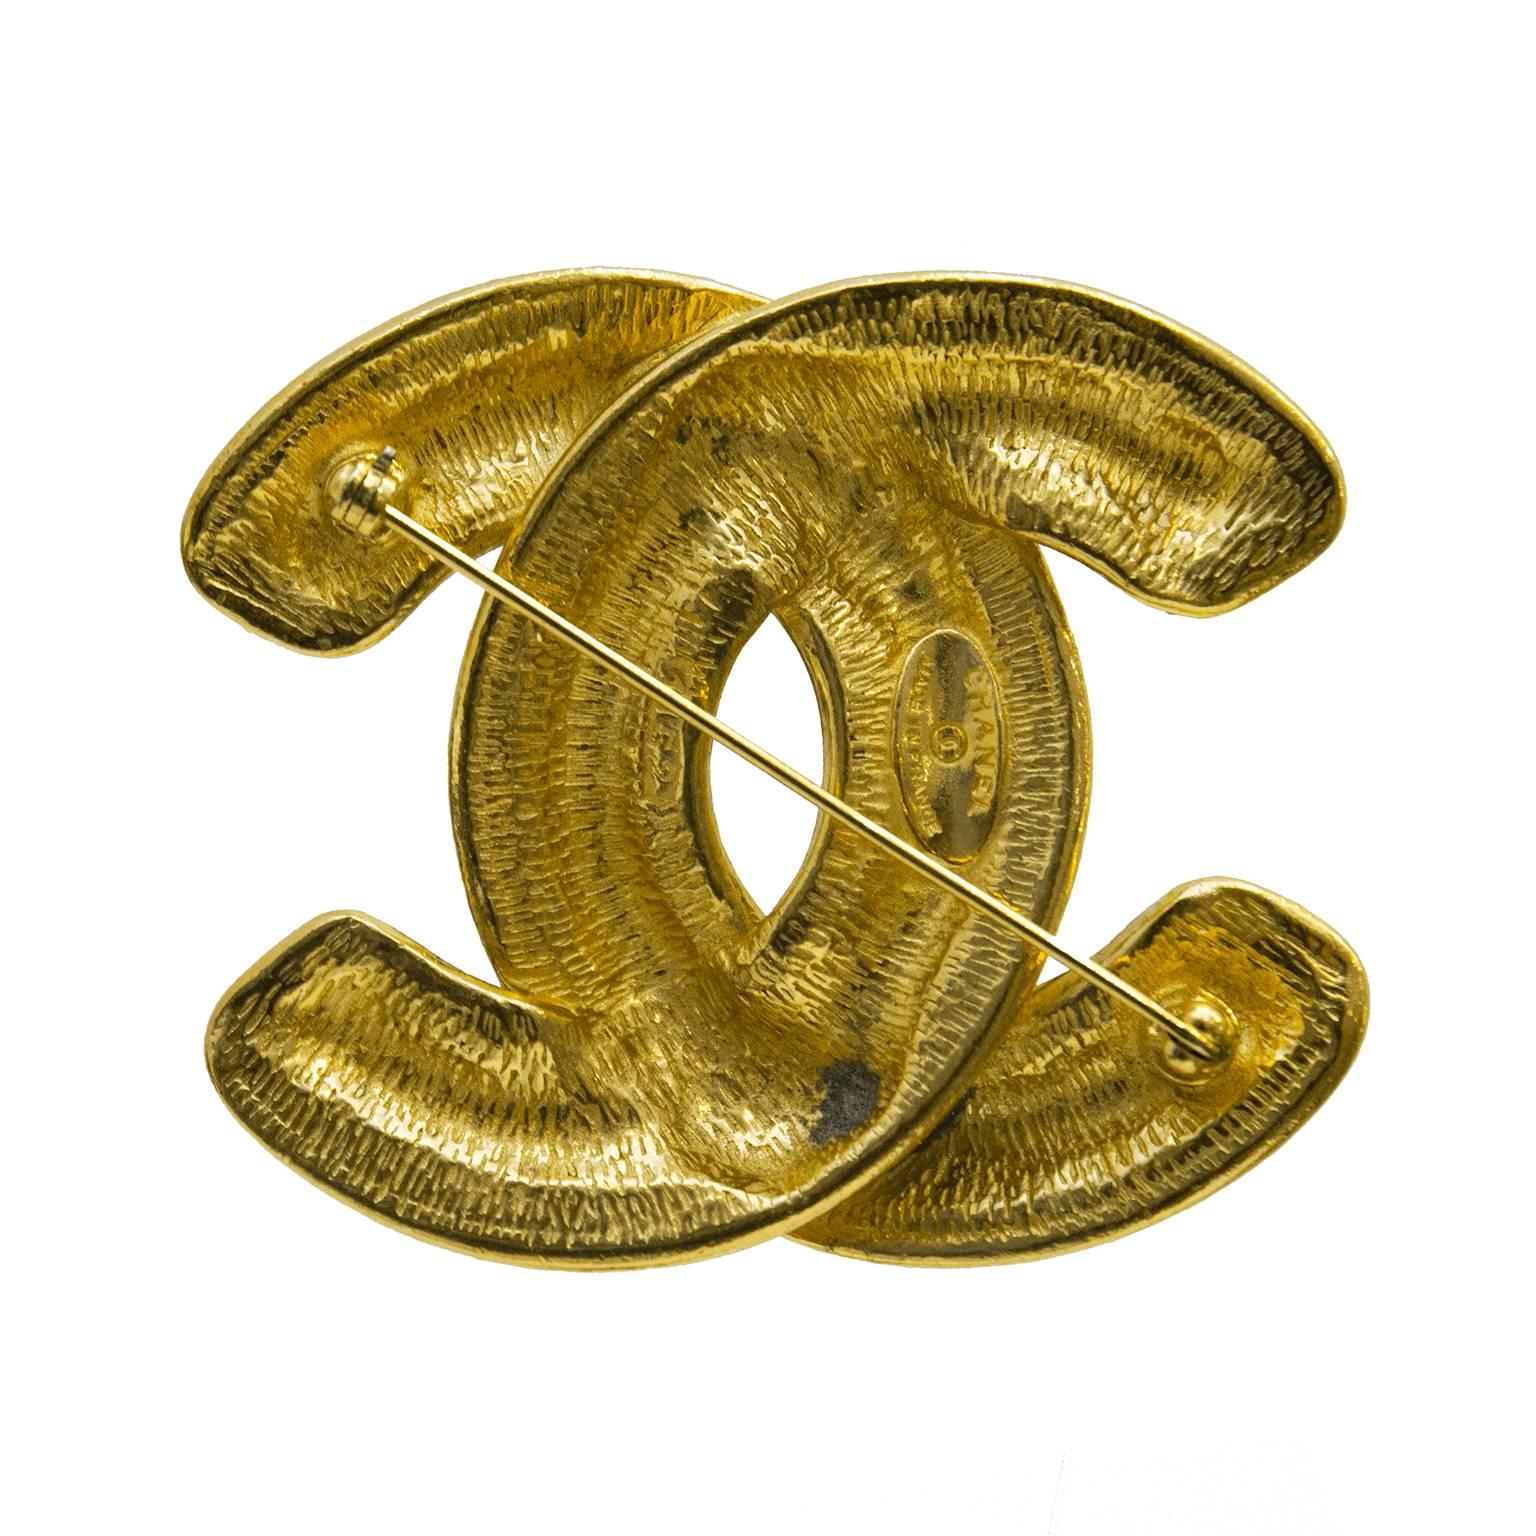 Double CC Chanel brooch in gilt metal with faux quilted motif. Perfect to wear on your favorite denim jacket or on the lapel of a blazer. In excellent condition, a great gift idea for someone special. 

Length 2.25